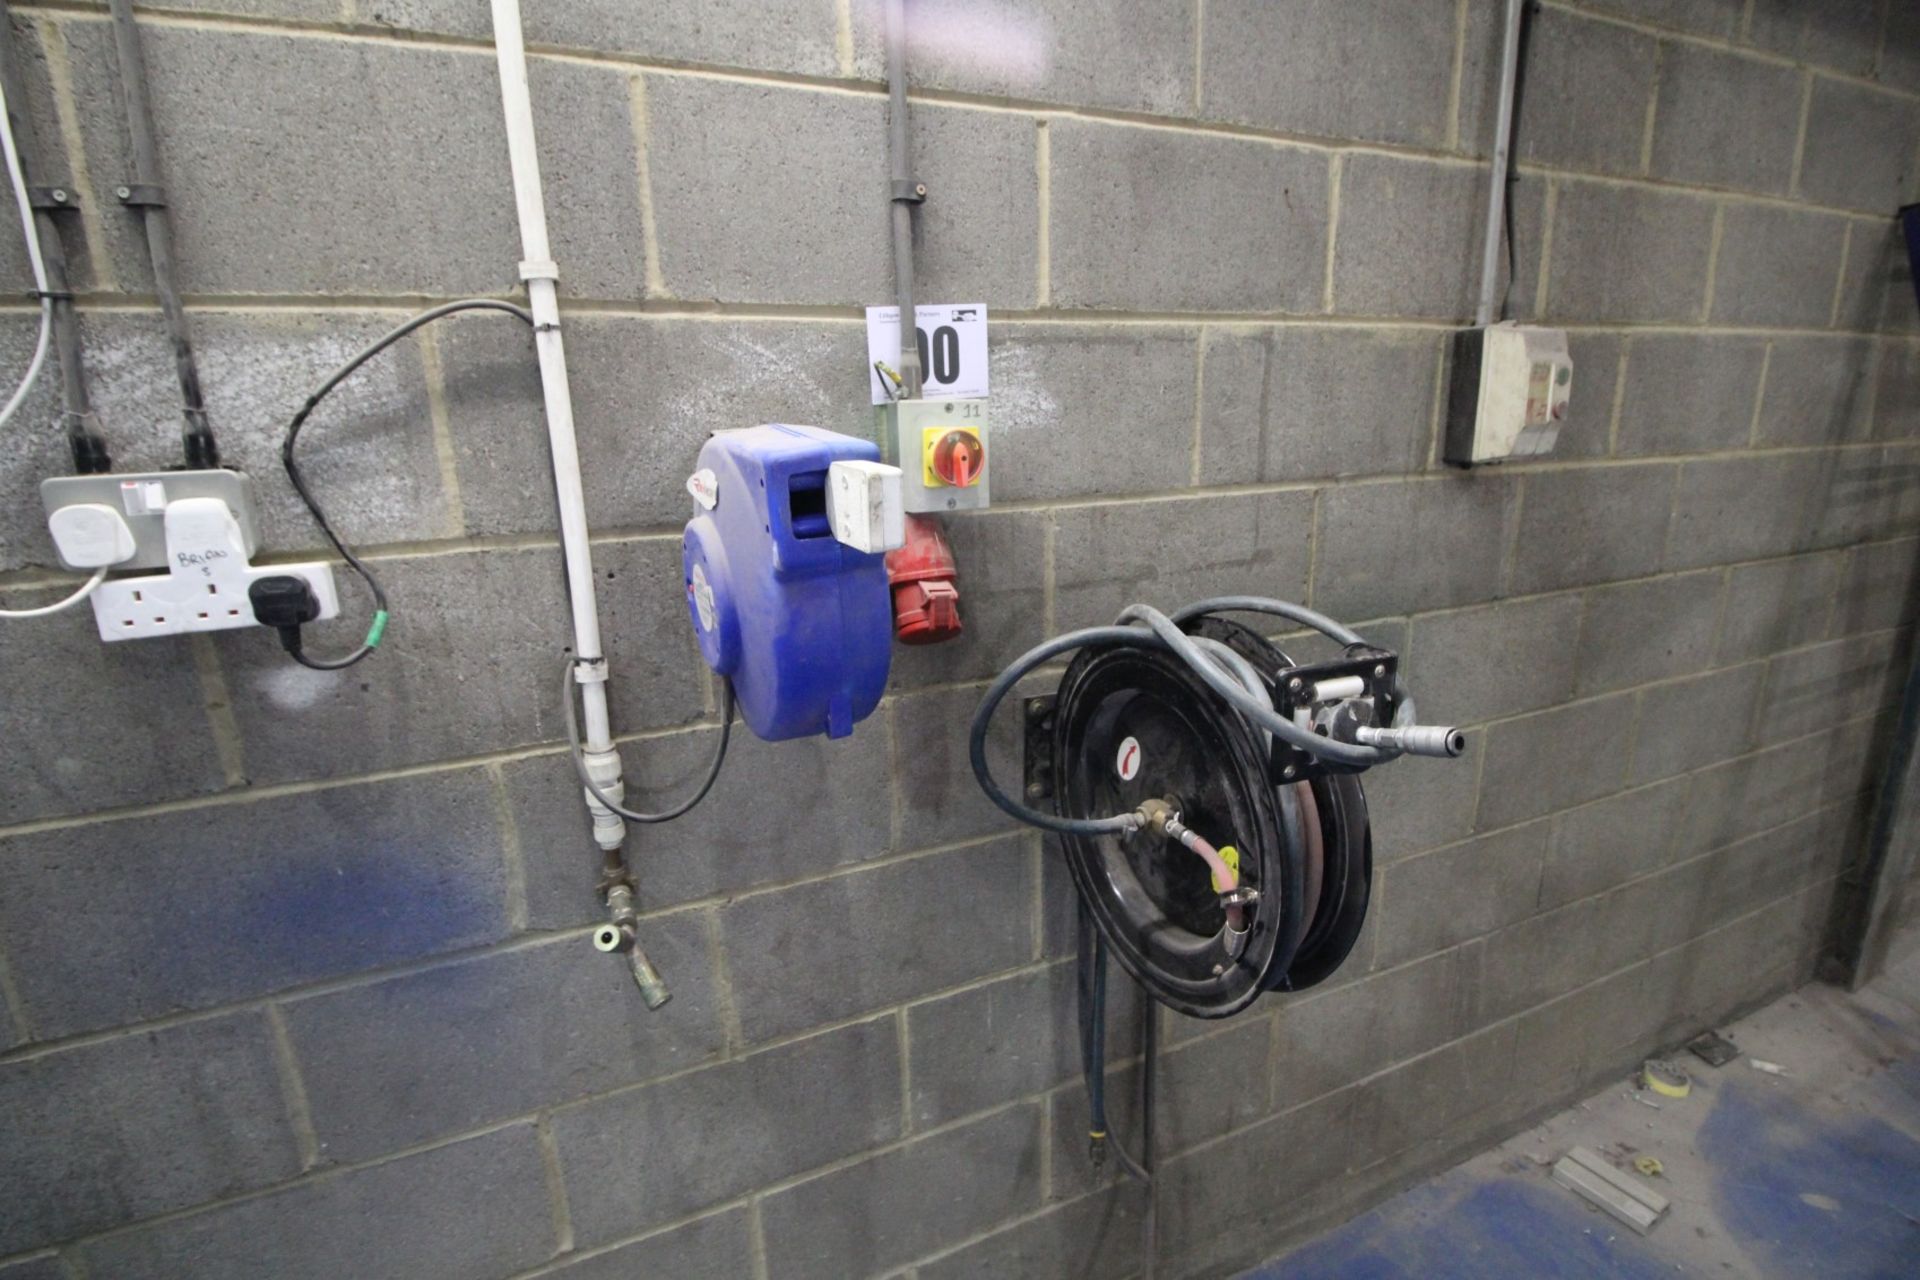 WALL MOUNTED, BLACK SPOOL AND CONTENTS OF AIR LINE, AND WALL MOUNTED, 240V, CABLE REEL. THE